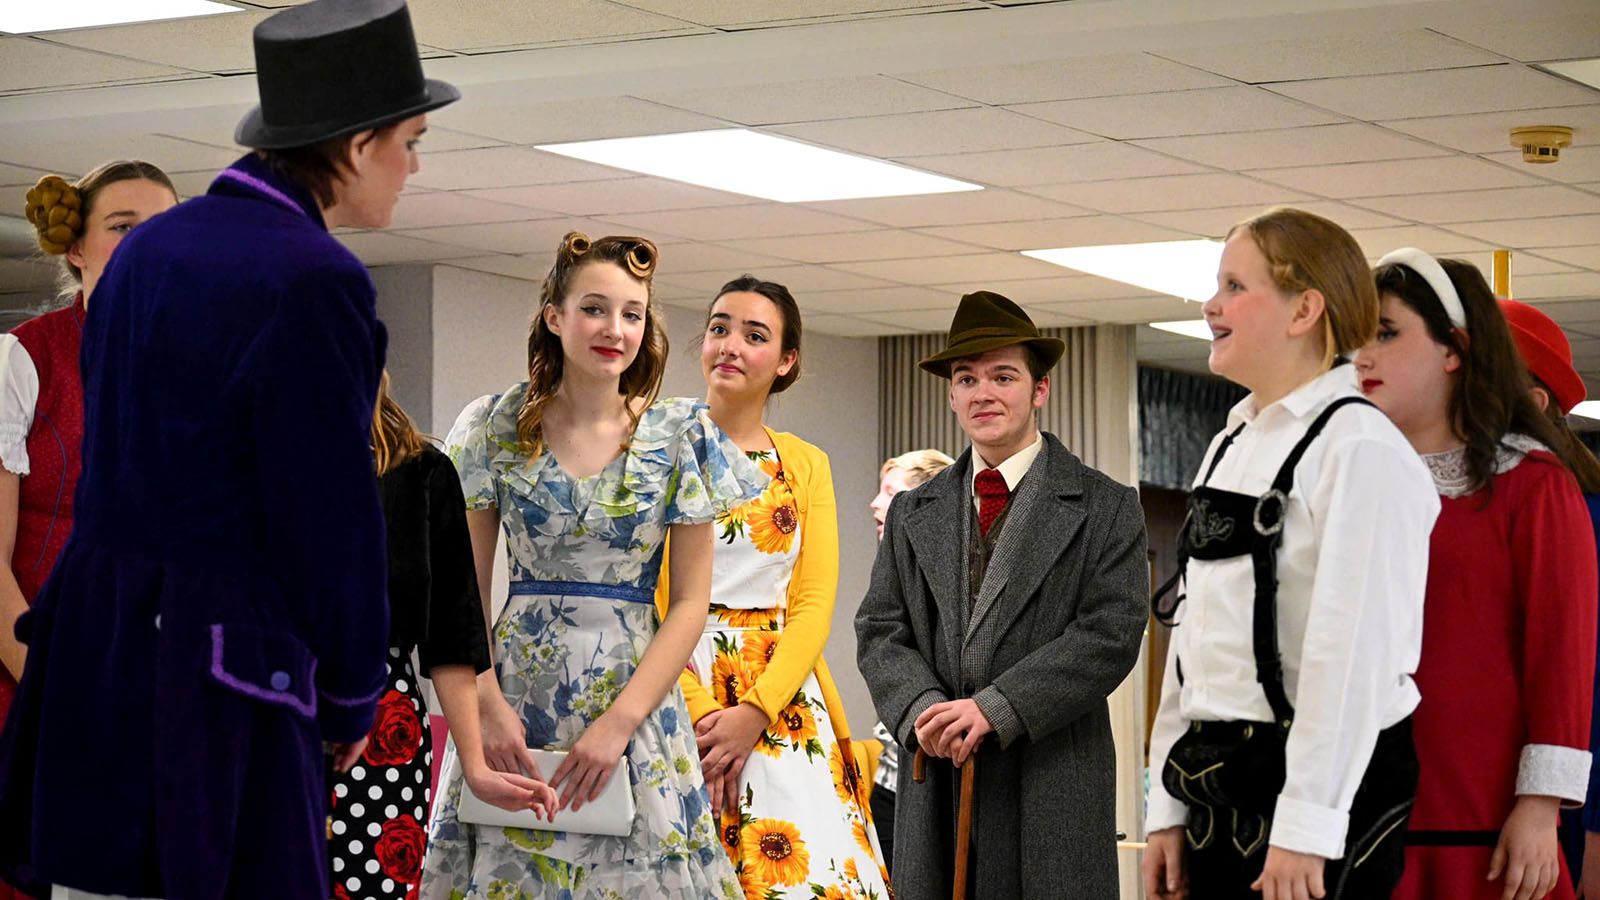 Fire & Light Productions is putting on "Roald Dahl's Willy Wonka."